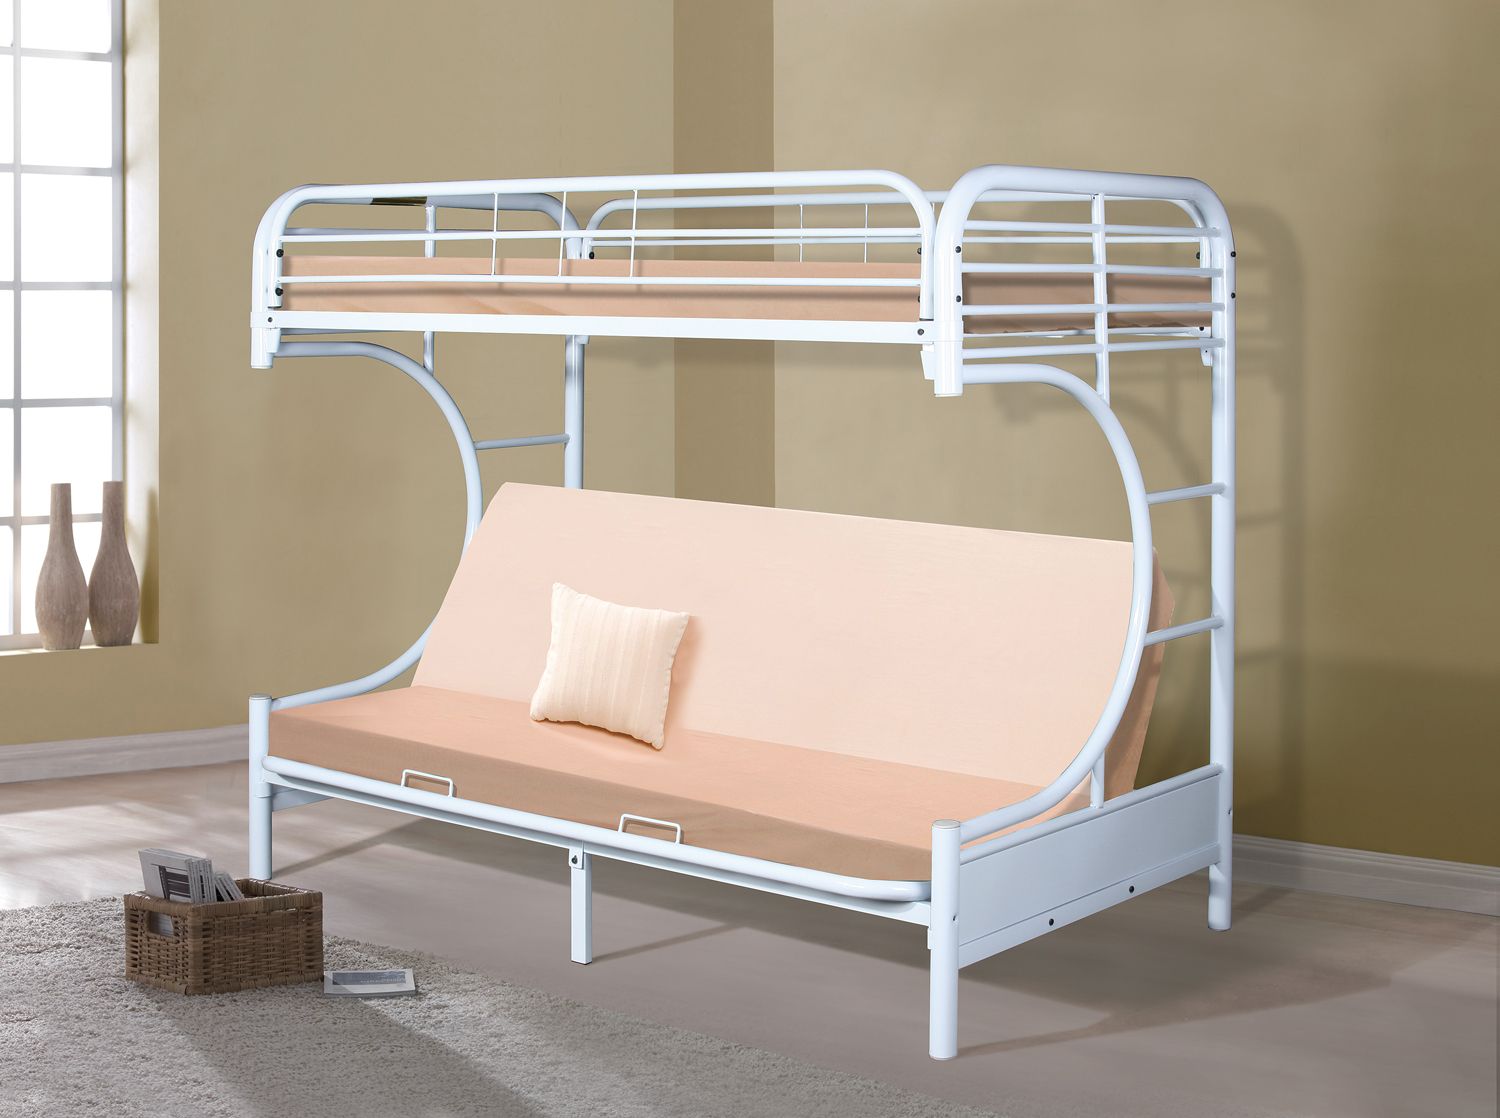 Donco Trading Company C-Shape Futon Bunk Bed